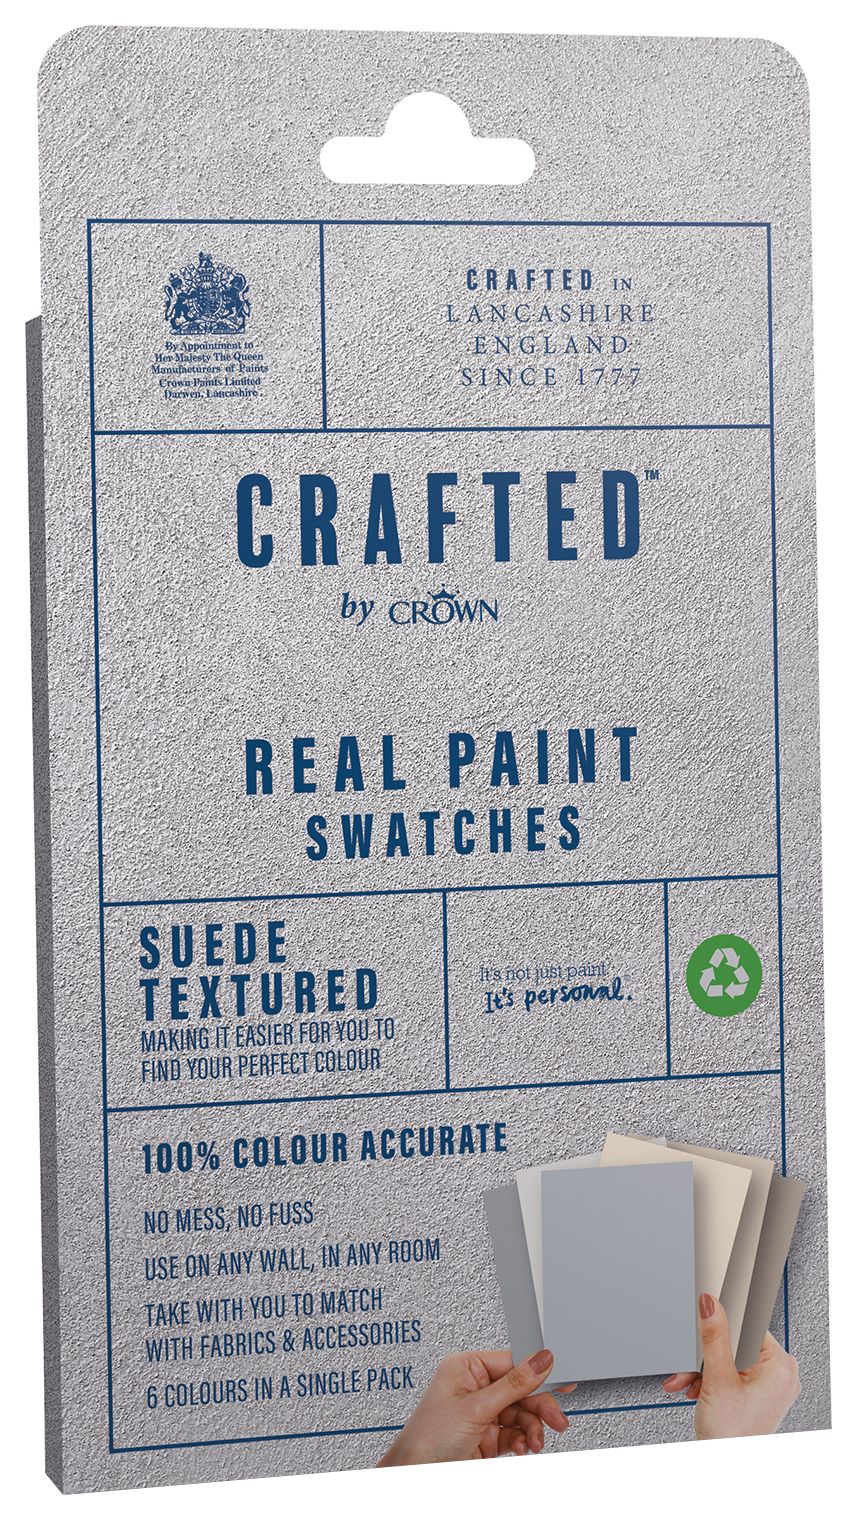 CRAFTED by Crown Flat Matt Real Paint Swatch - Subtle Textured - Pack of 6